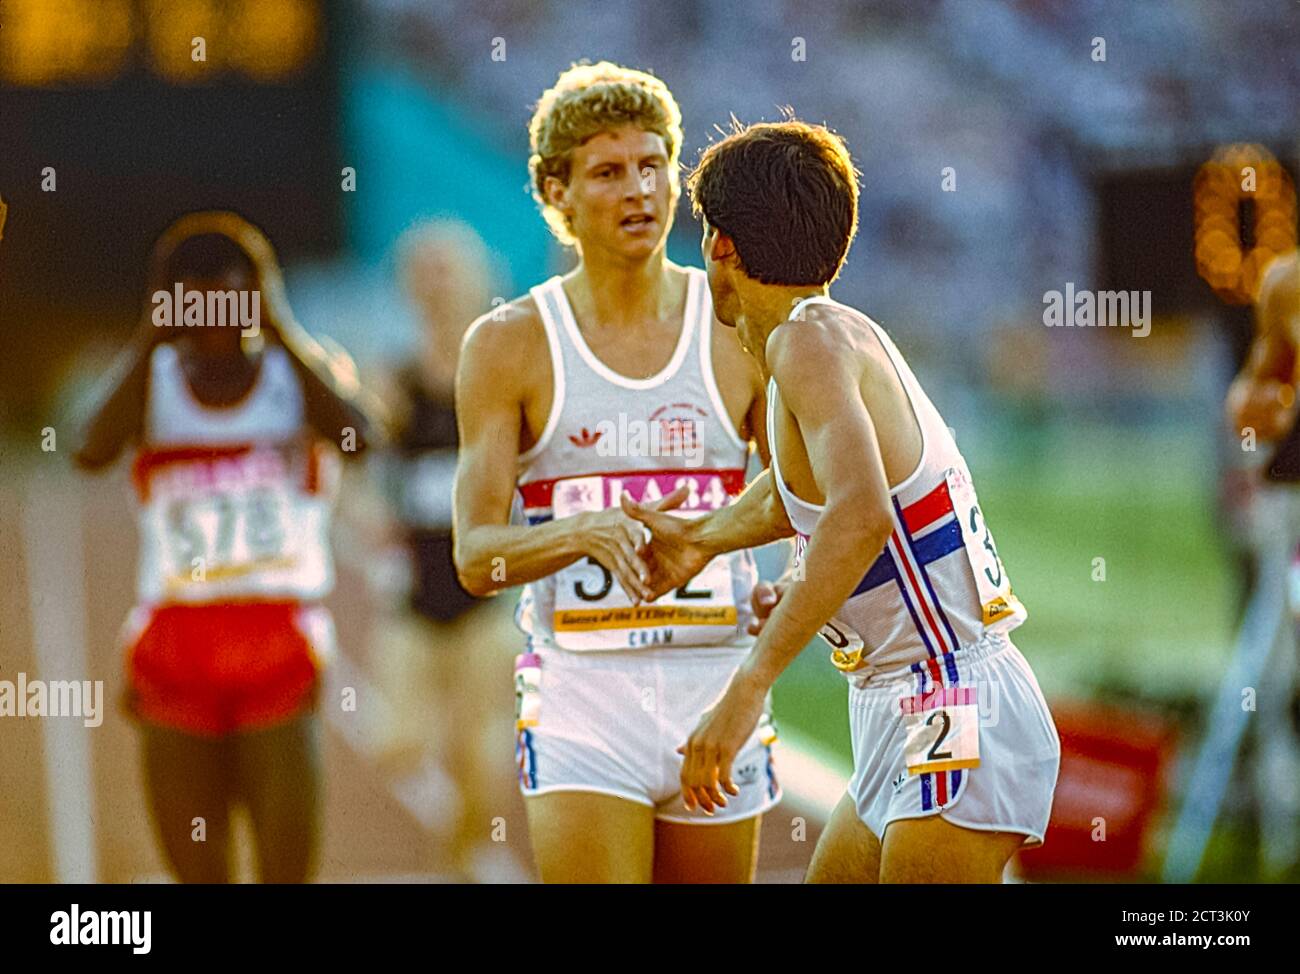 Seb Coe (GBR) winnig the 1500m defeating Steve Cram (GBR) for the gold medal at the 1984 Olympic Summer Games Olympic Stock Photo